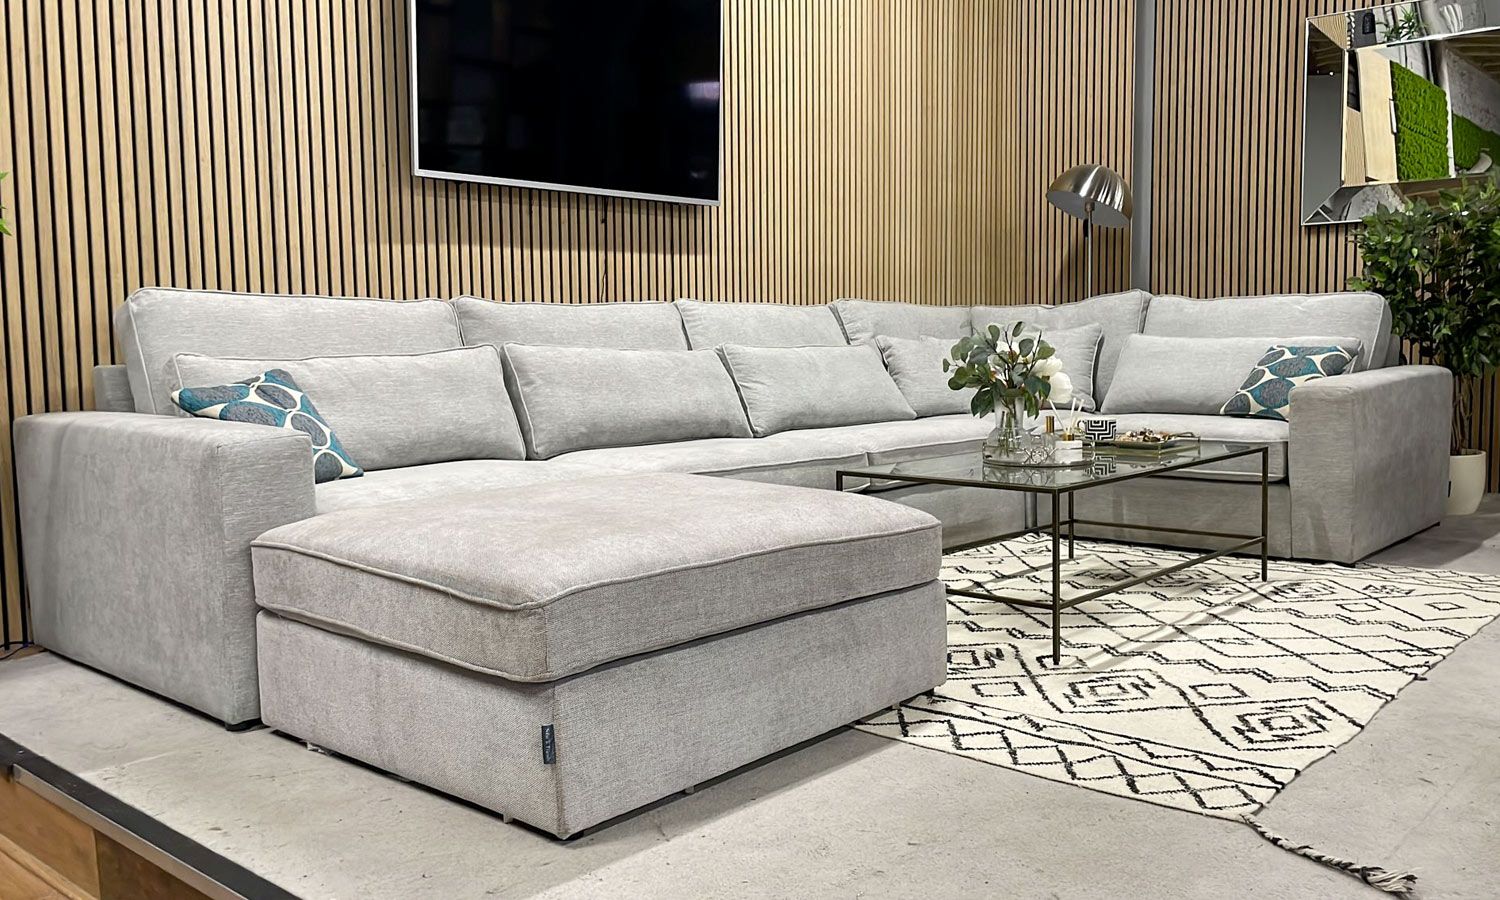 Navagio Light Grey Ascot Fabric U Shaped Sofa – Sofas & Friends With Regard To Sofas In Light Grey (View 5 of 15)